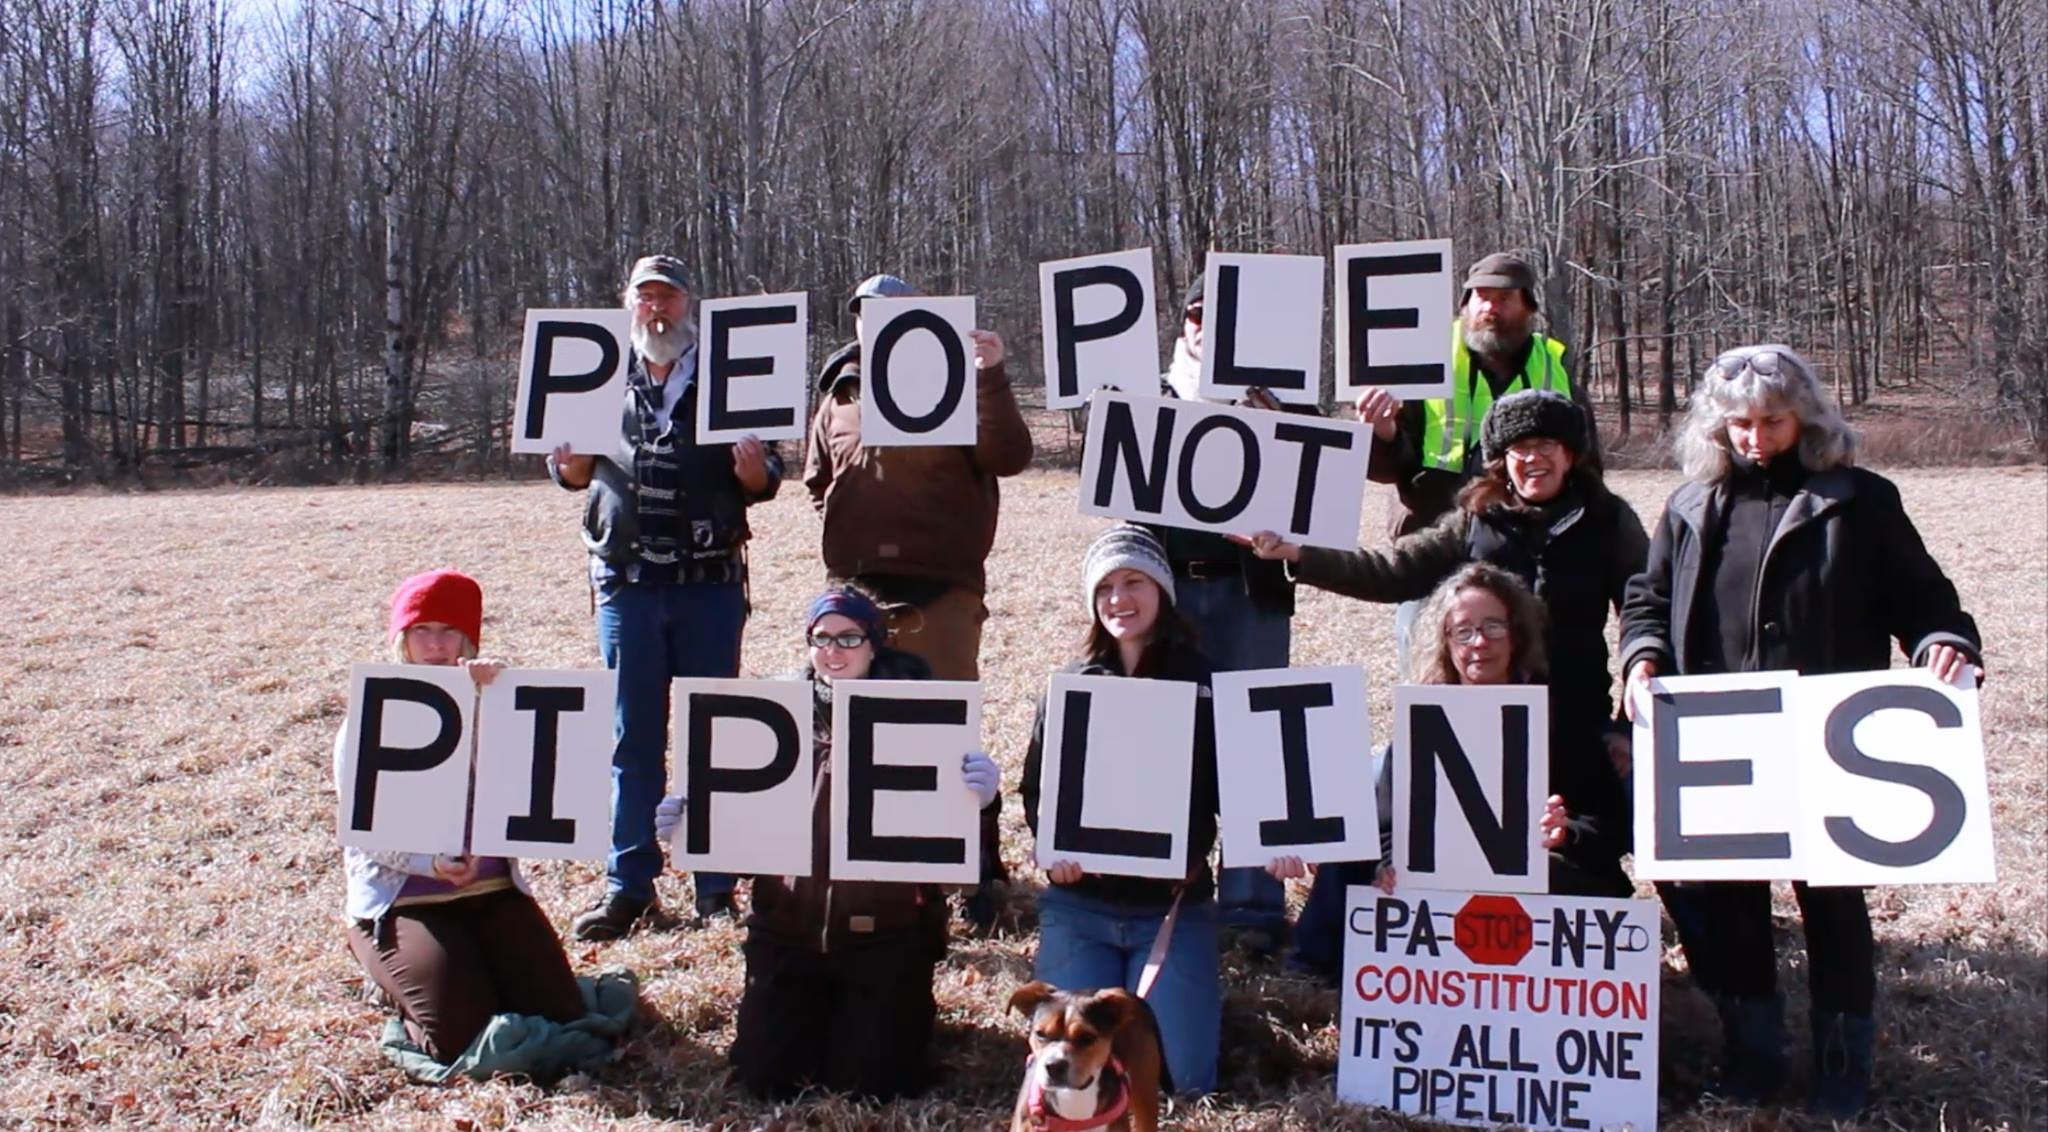 2016: Landowners and supporters protest the Constitution Pipeline in Northeast PA. (Photo: DC Media Group)